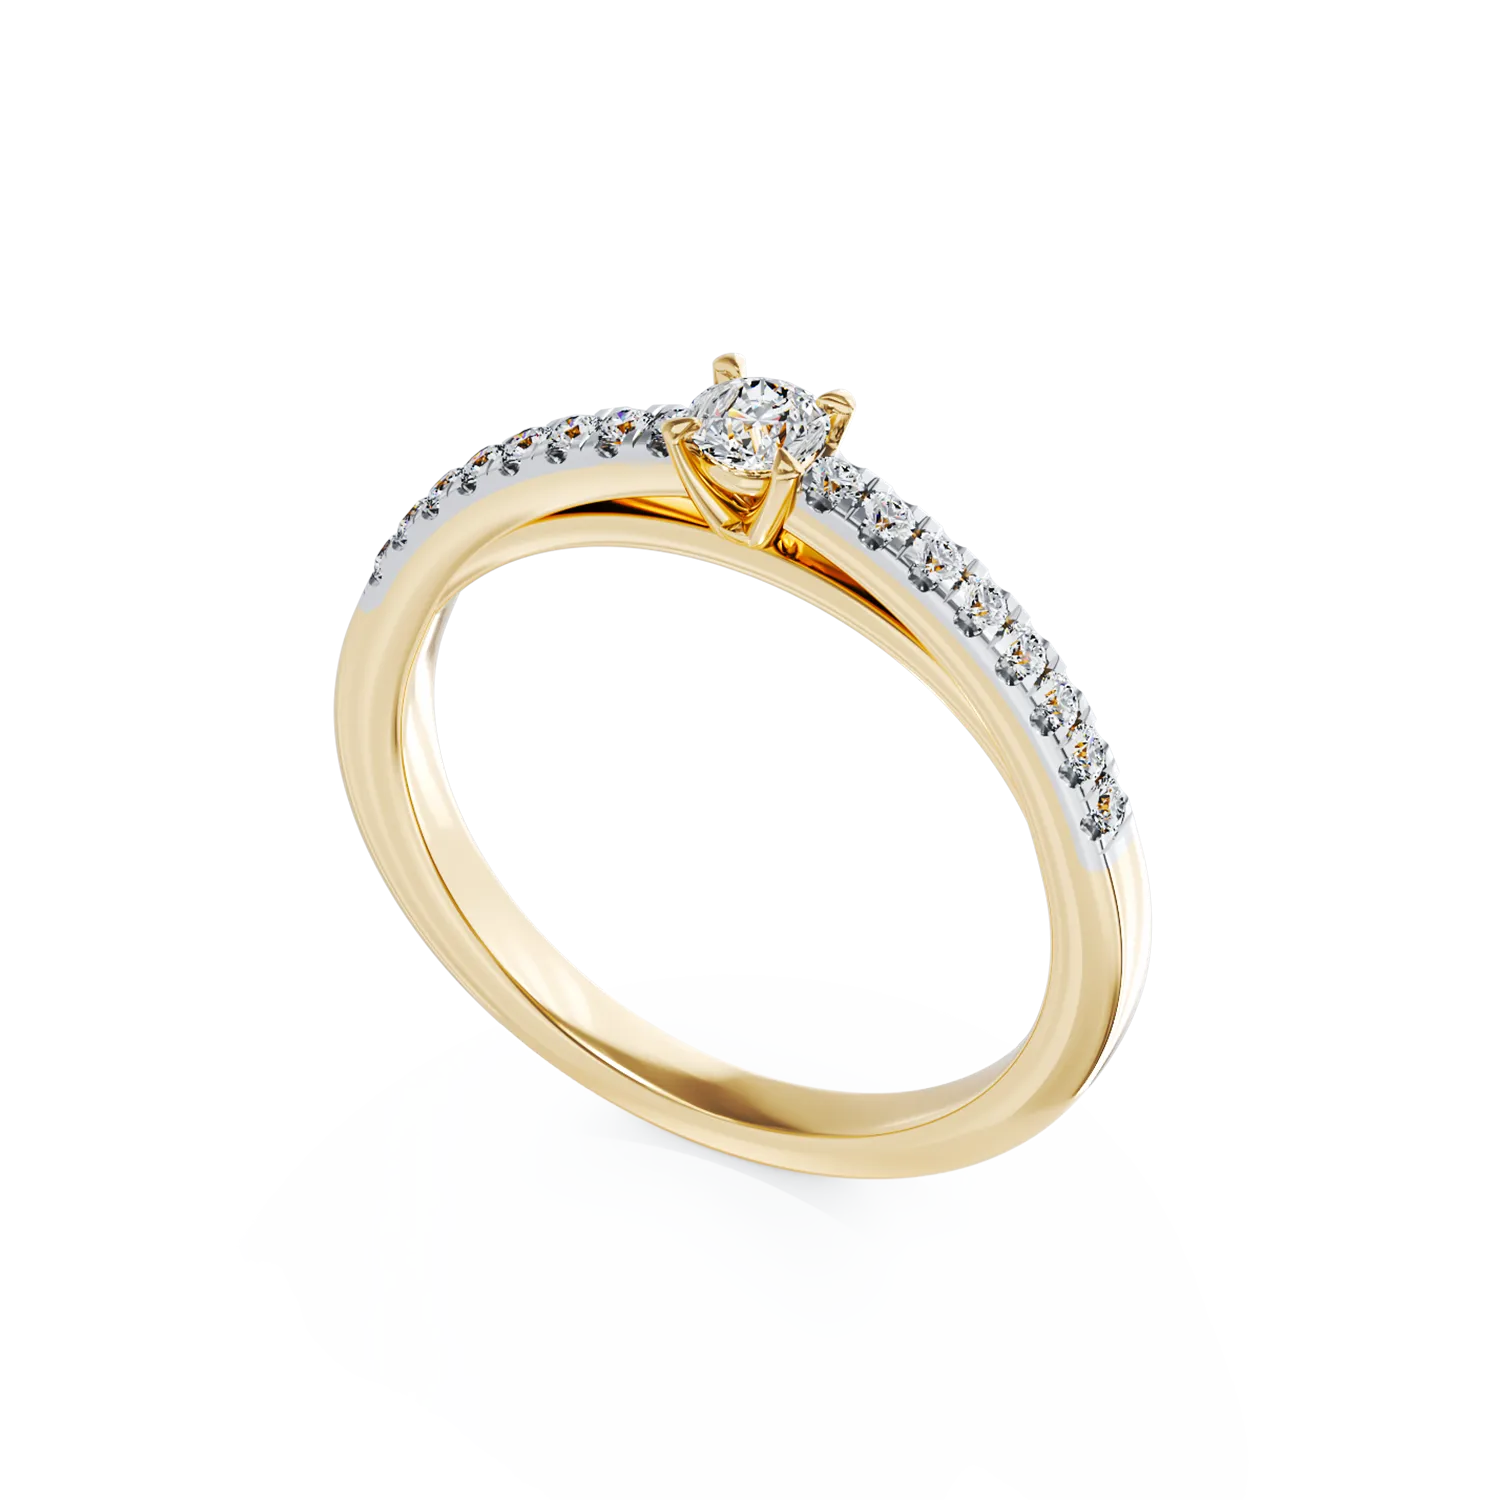 18K yellow gold engagement ring with 0.15ct diamond and 0.16ct diamonds